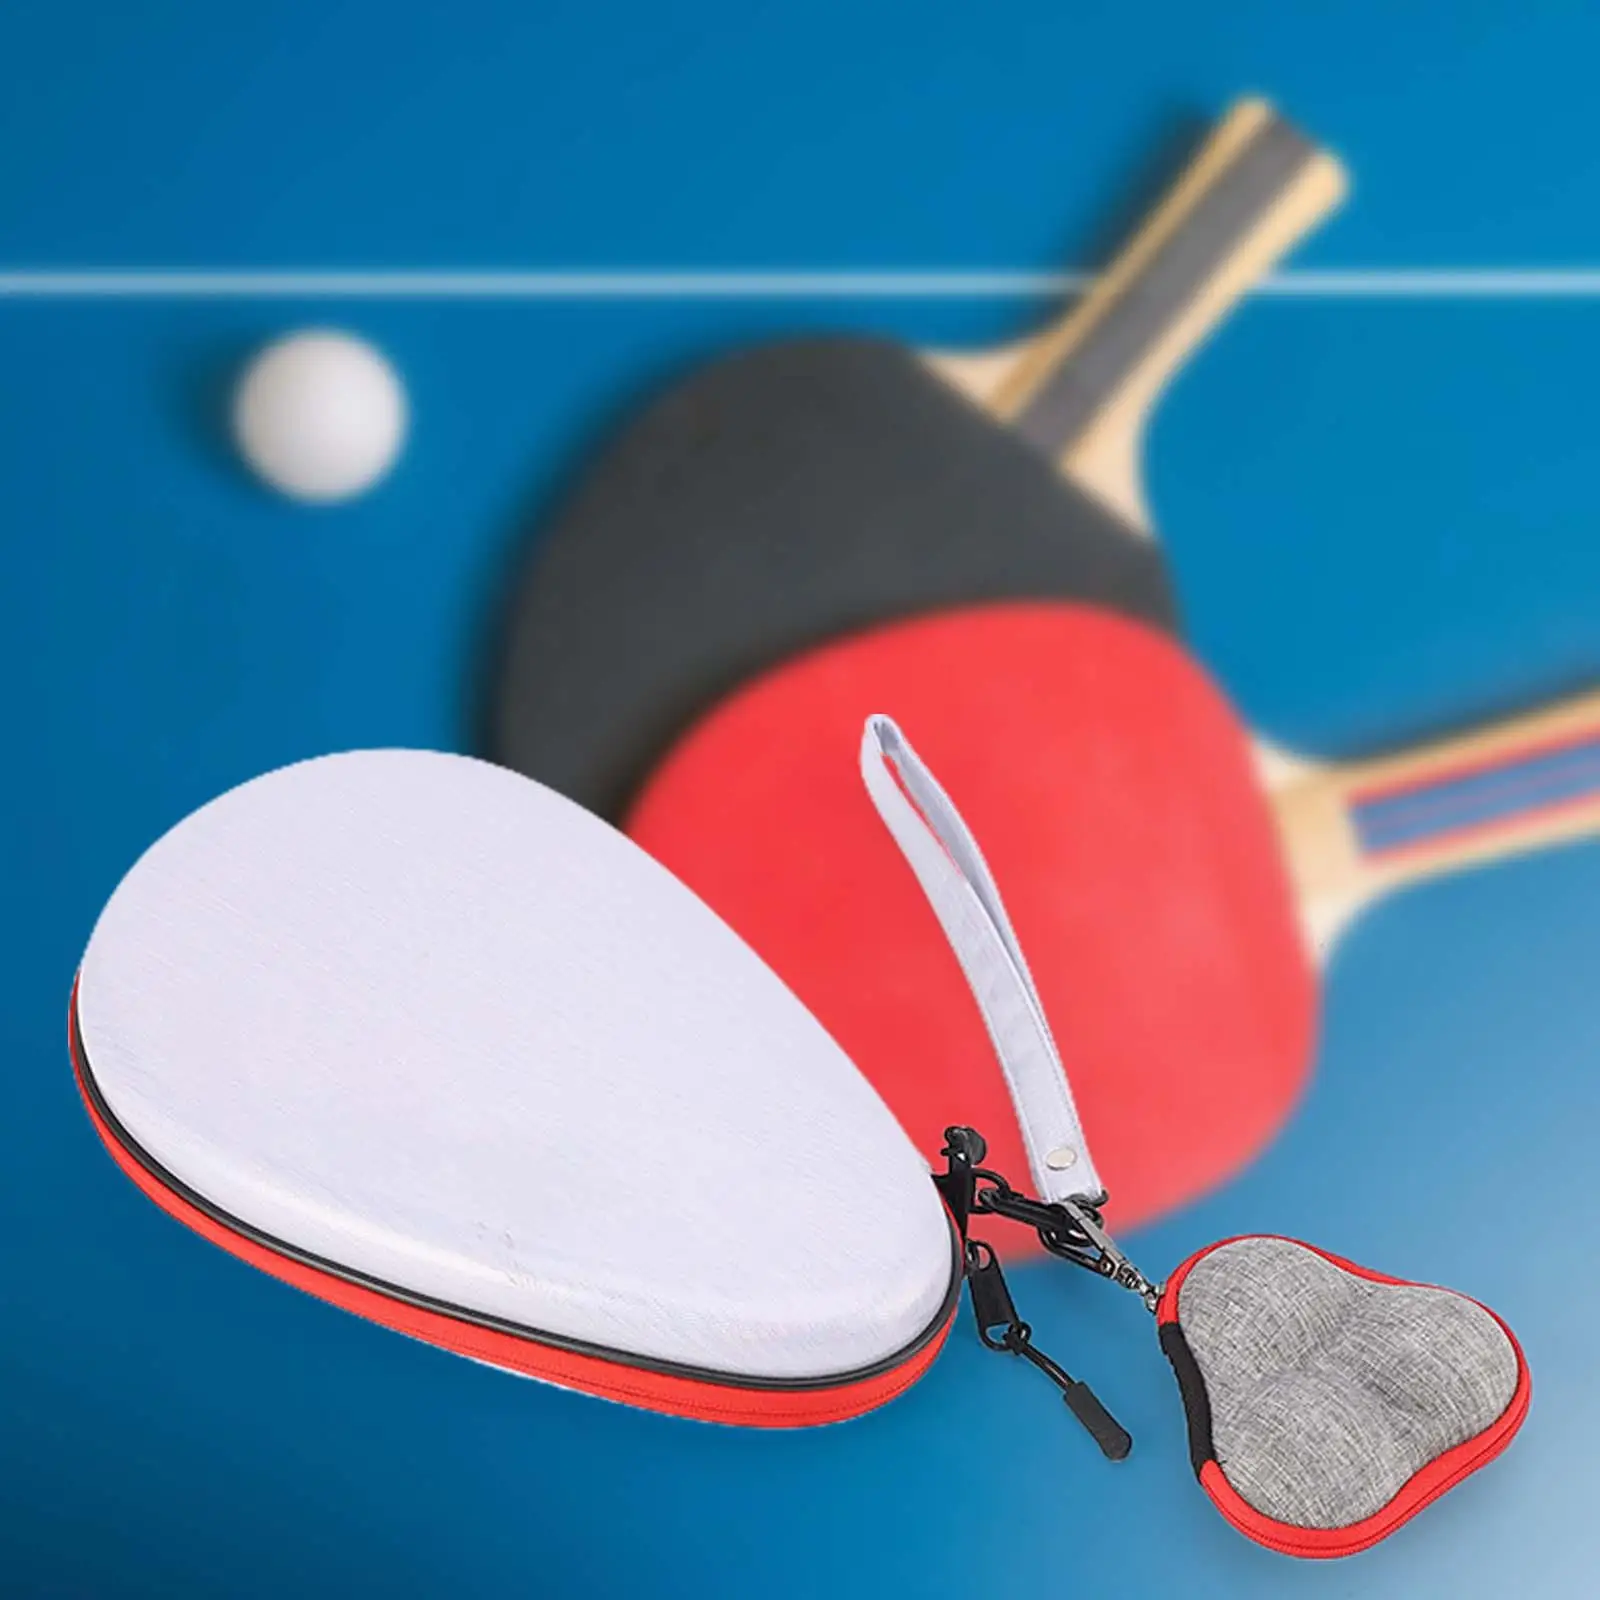 Pingpong Paddle Case Soft Wear Resistant with Zipper Hard Gourd with Ball Bag Protector for Sportsman Unisex Athlete Adult Home